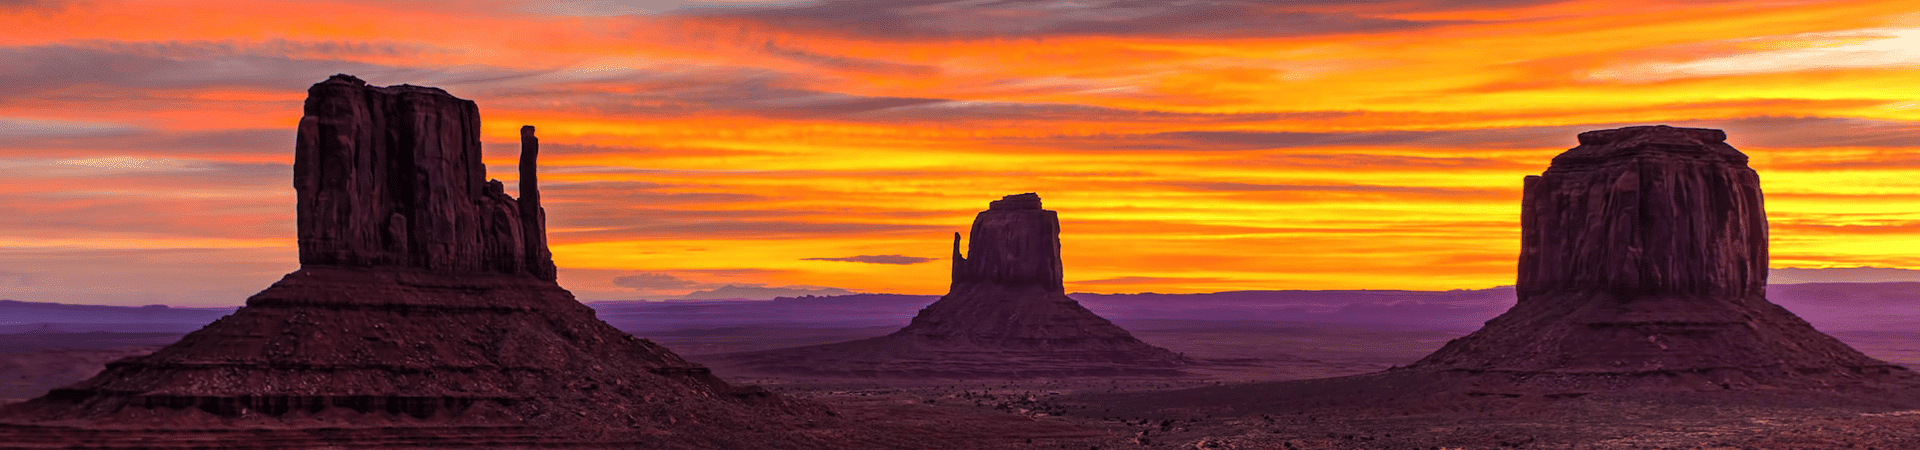 monument-valley-sunset-1920x450